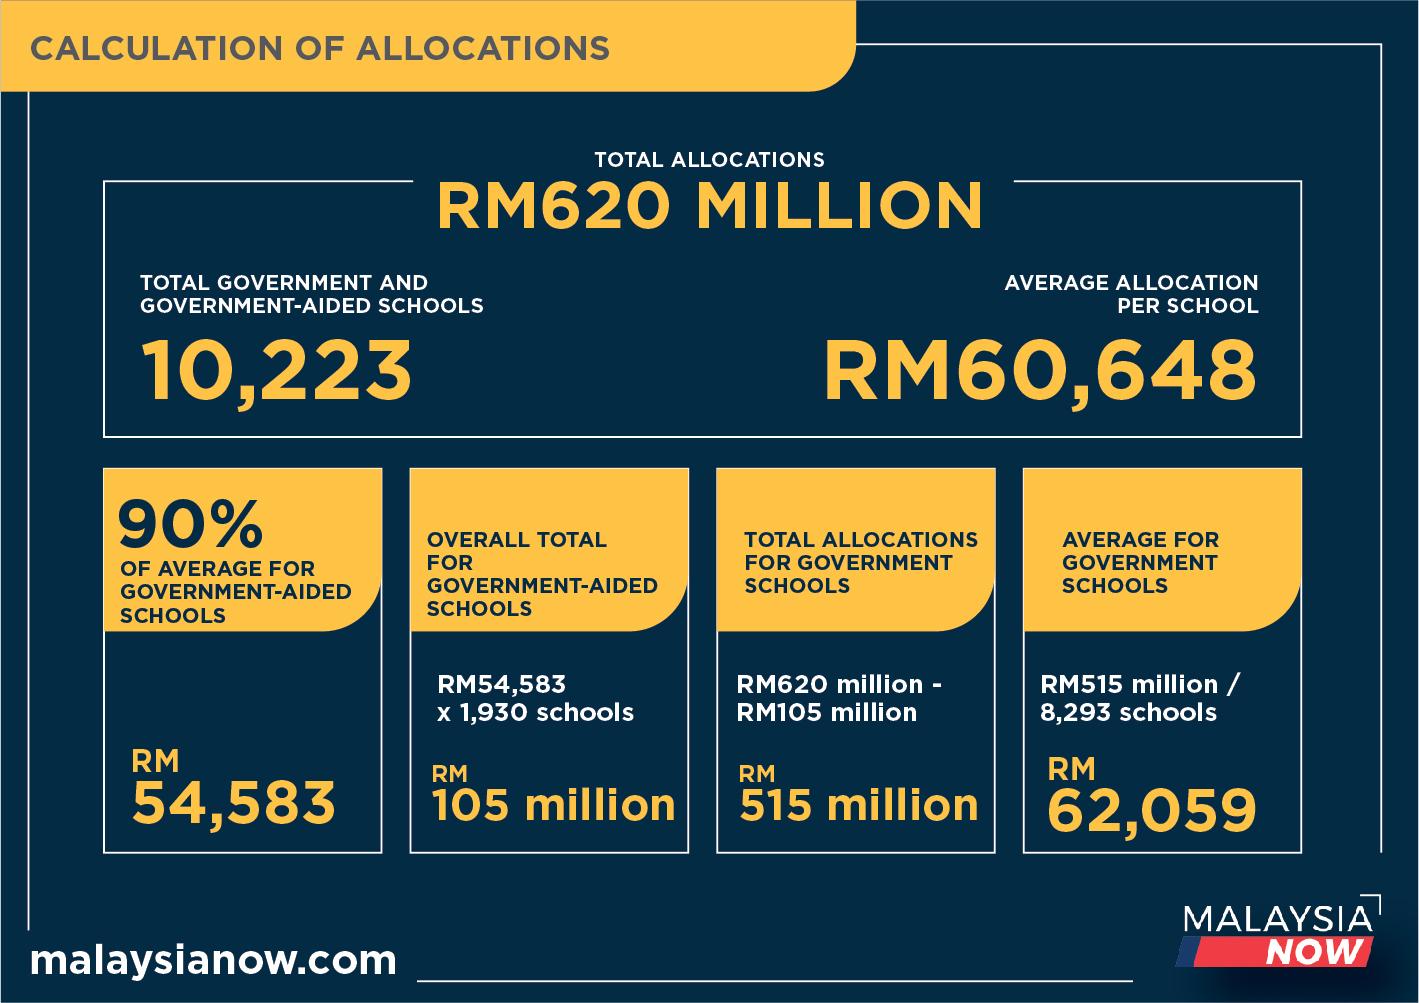 13-MNow-CALCULTION-OF-ALLOCATIONS-02-2